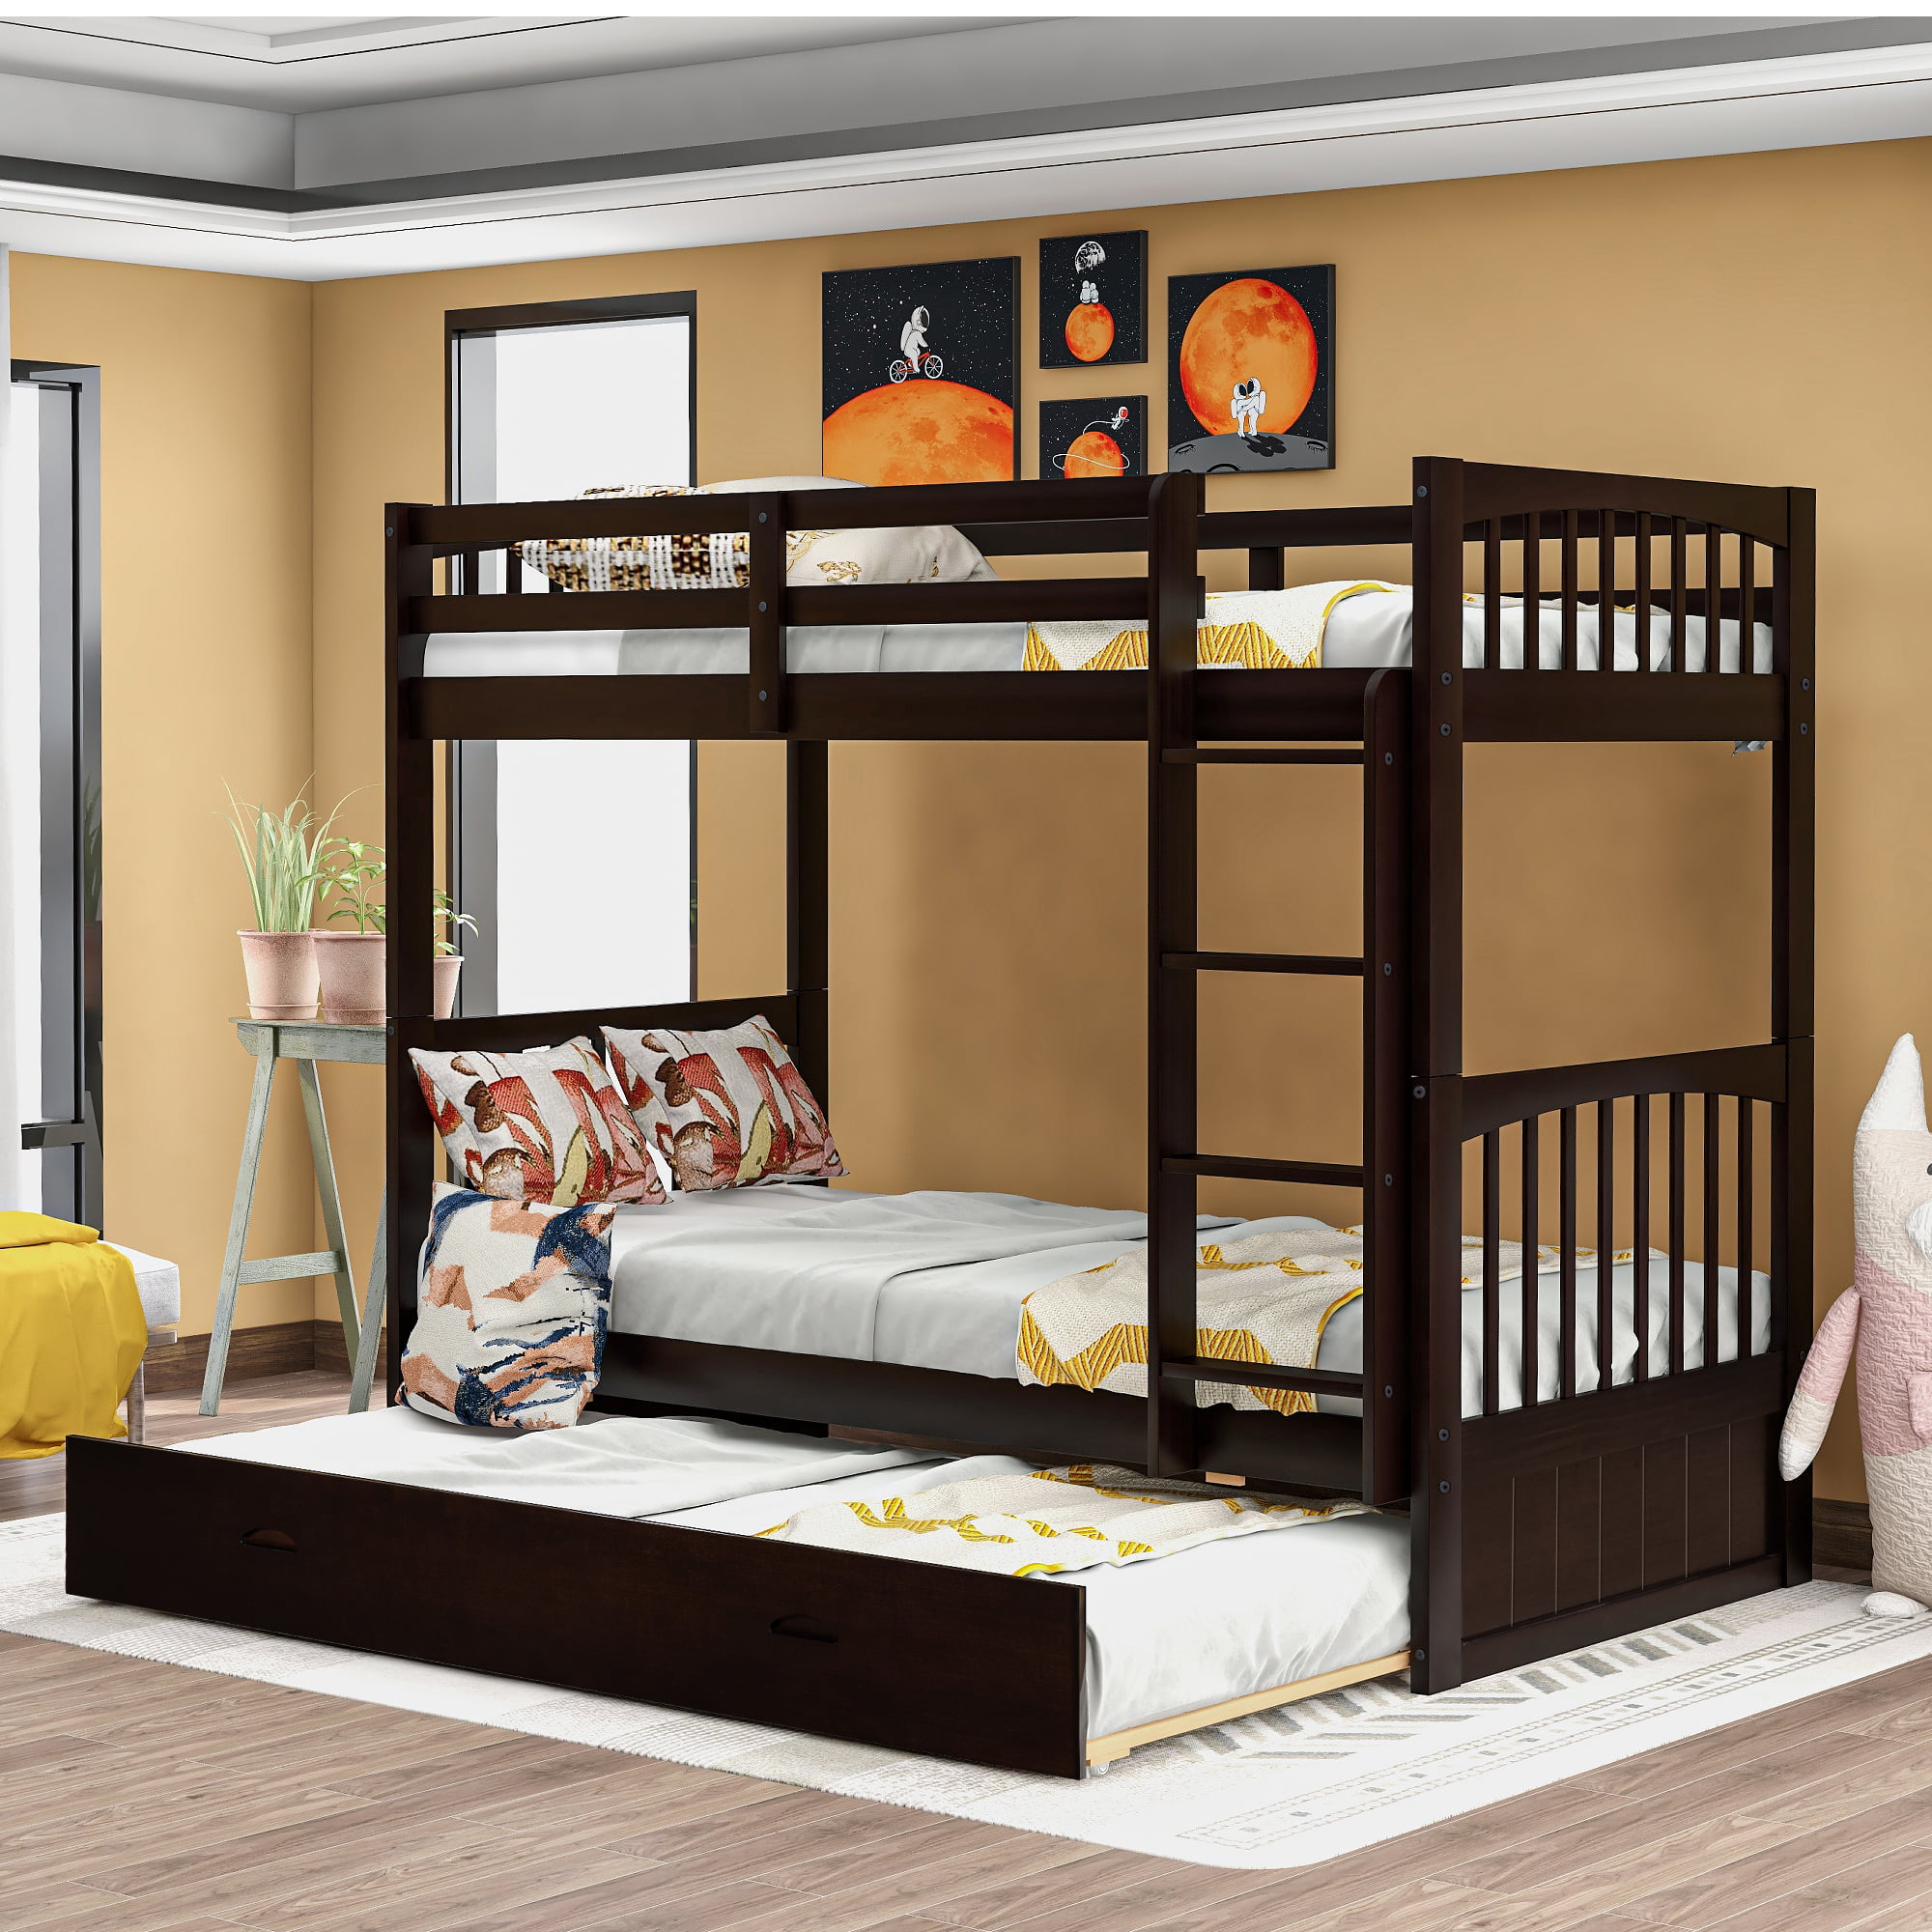 Merax Wood Bunk Bed Twin Over, Bunk Bed With Guest Bed